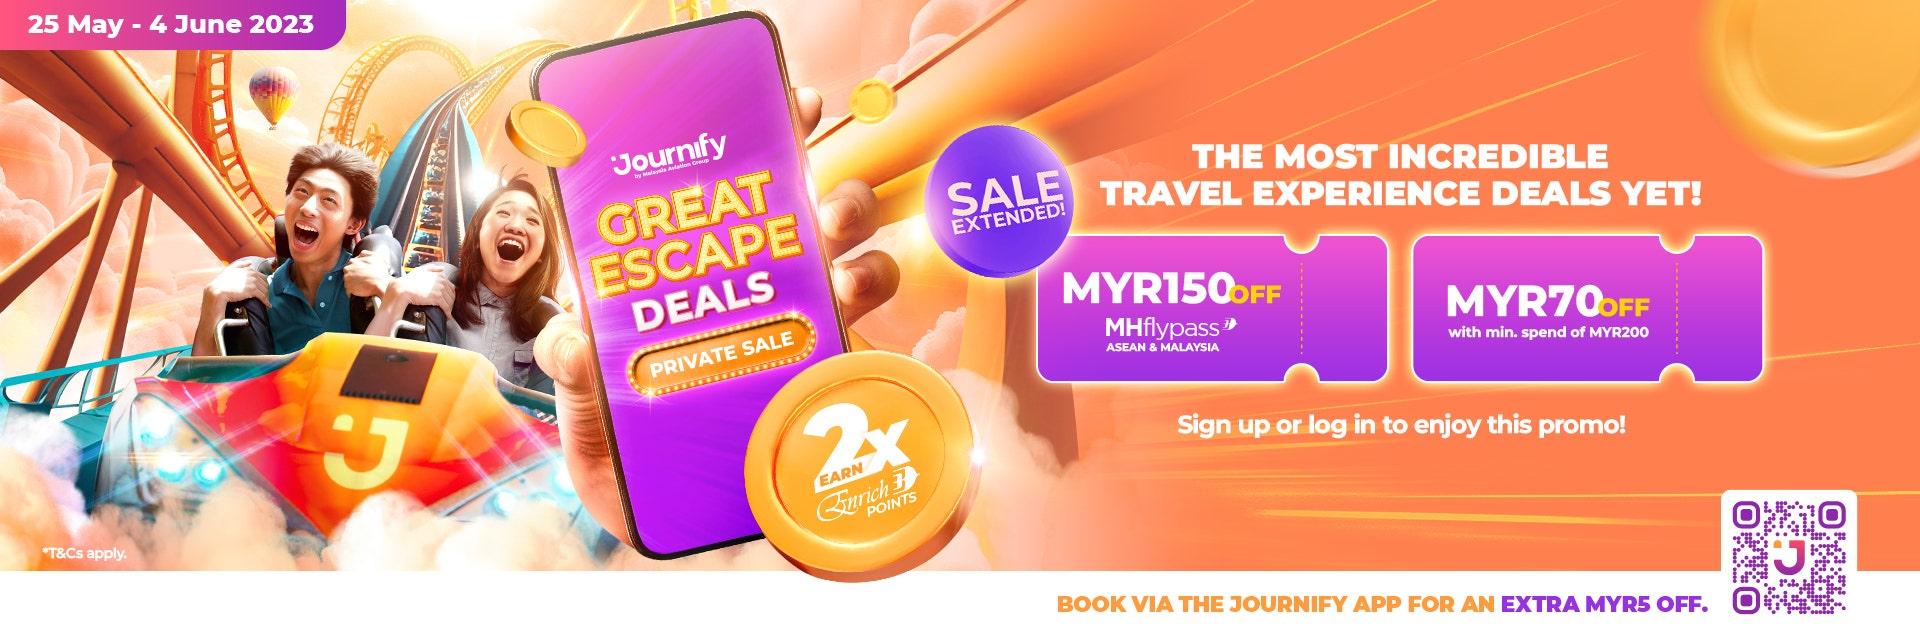 Journify Great Escape Deals (Exclusively for Enrich members)